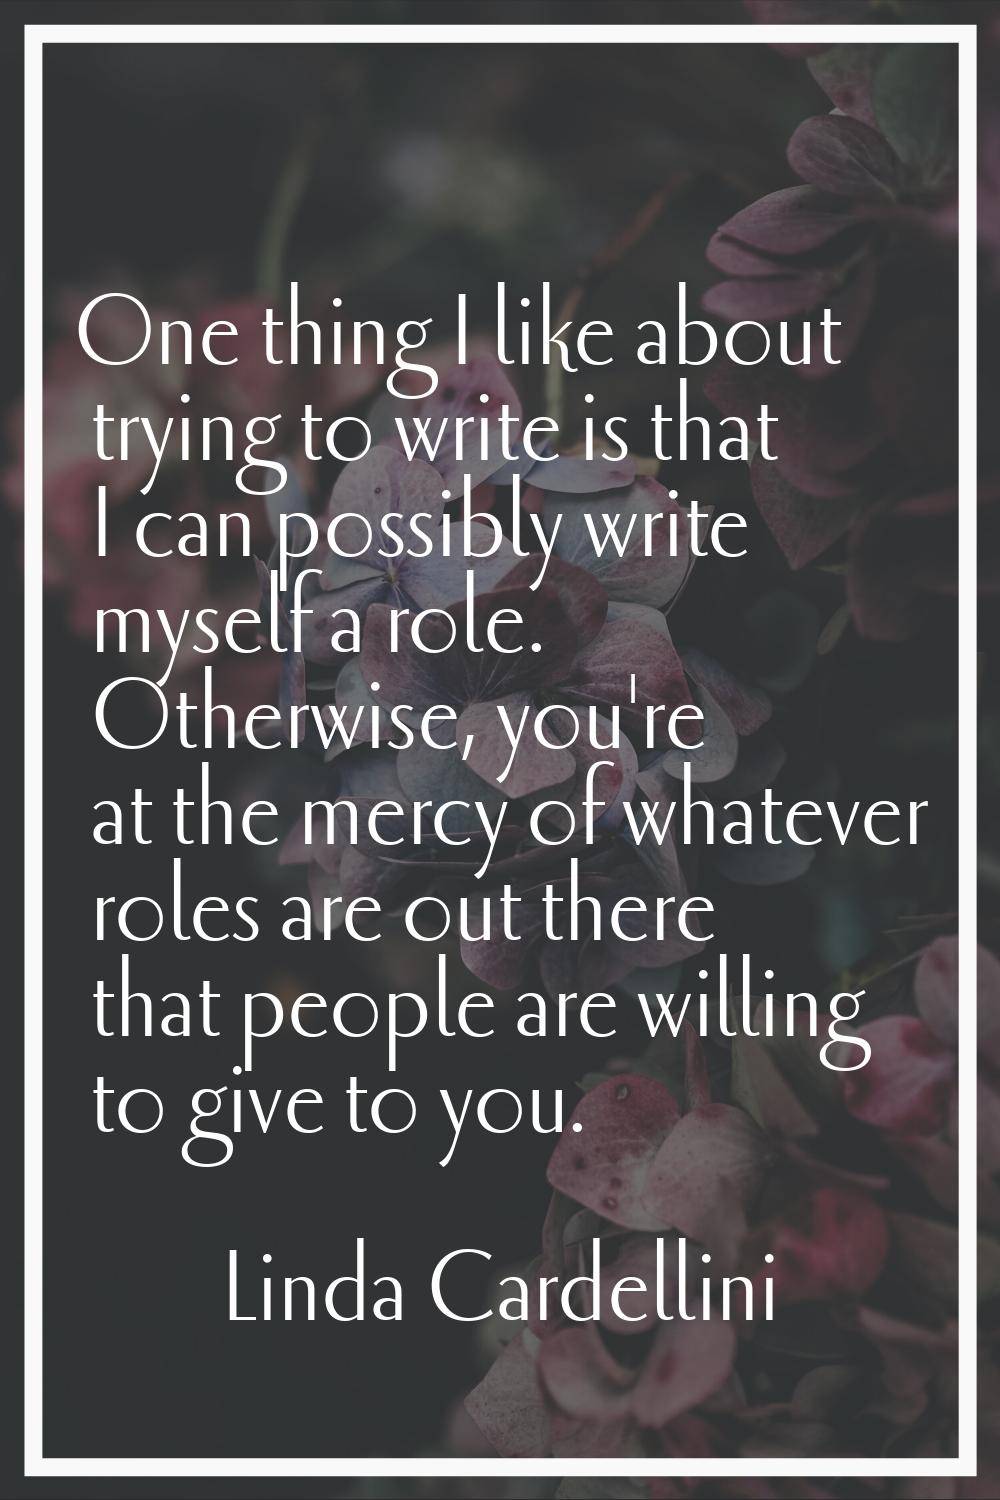 One thing I like about trying to write is that I can possibly write myself a role. Otherwise, you'r